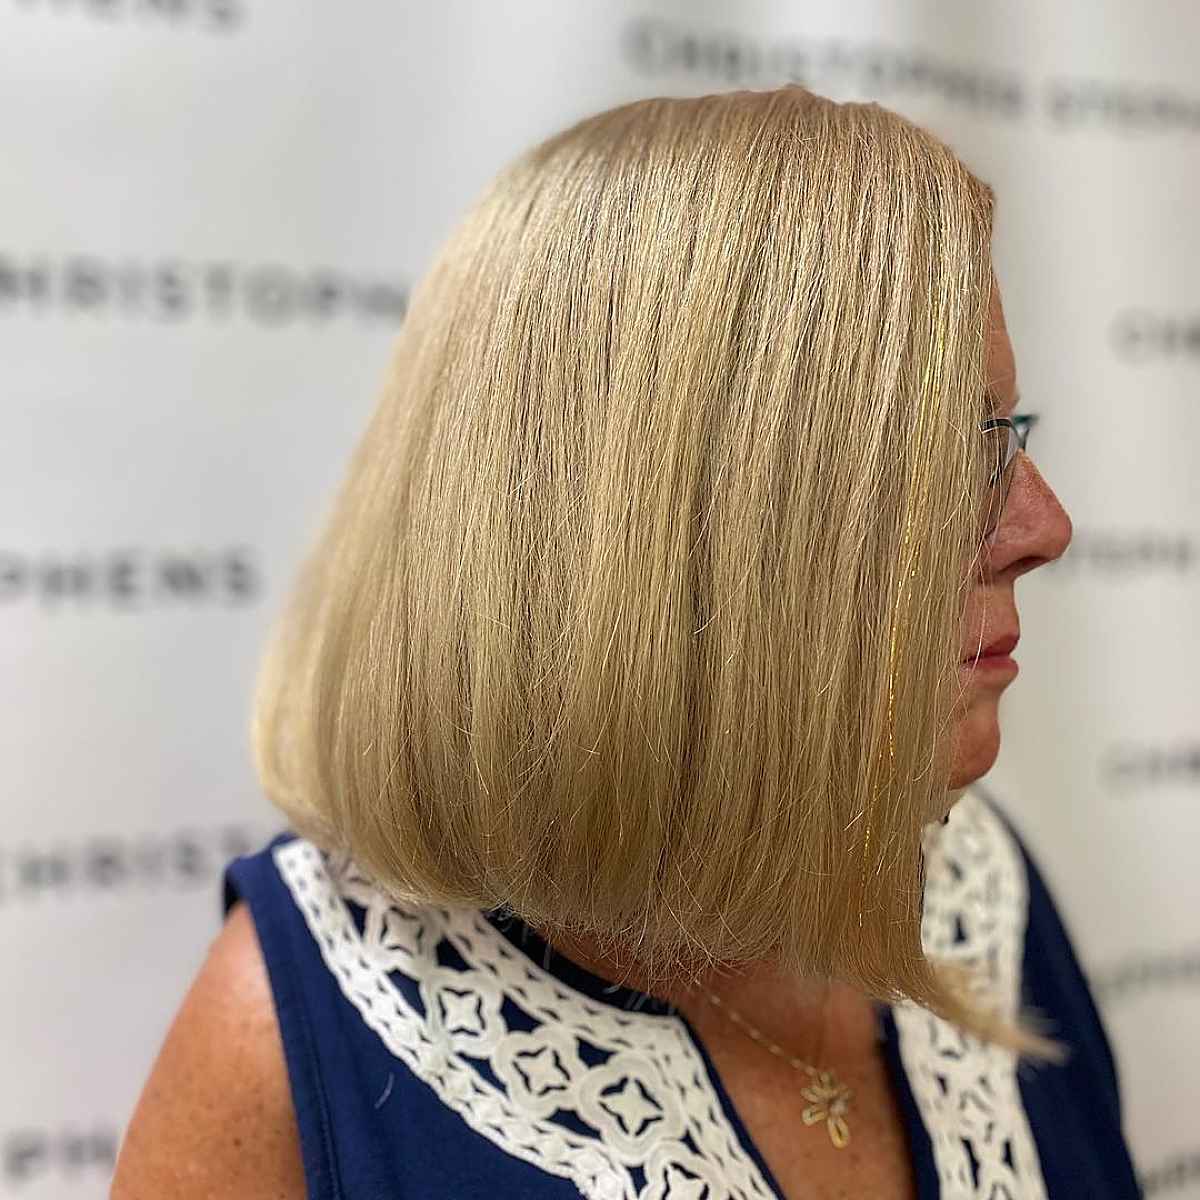 35 Voluminous Hairstyles for Women In Their 60s with Very Thin Hair